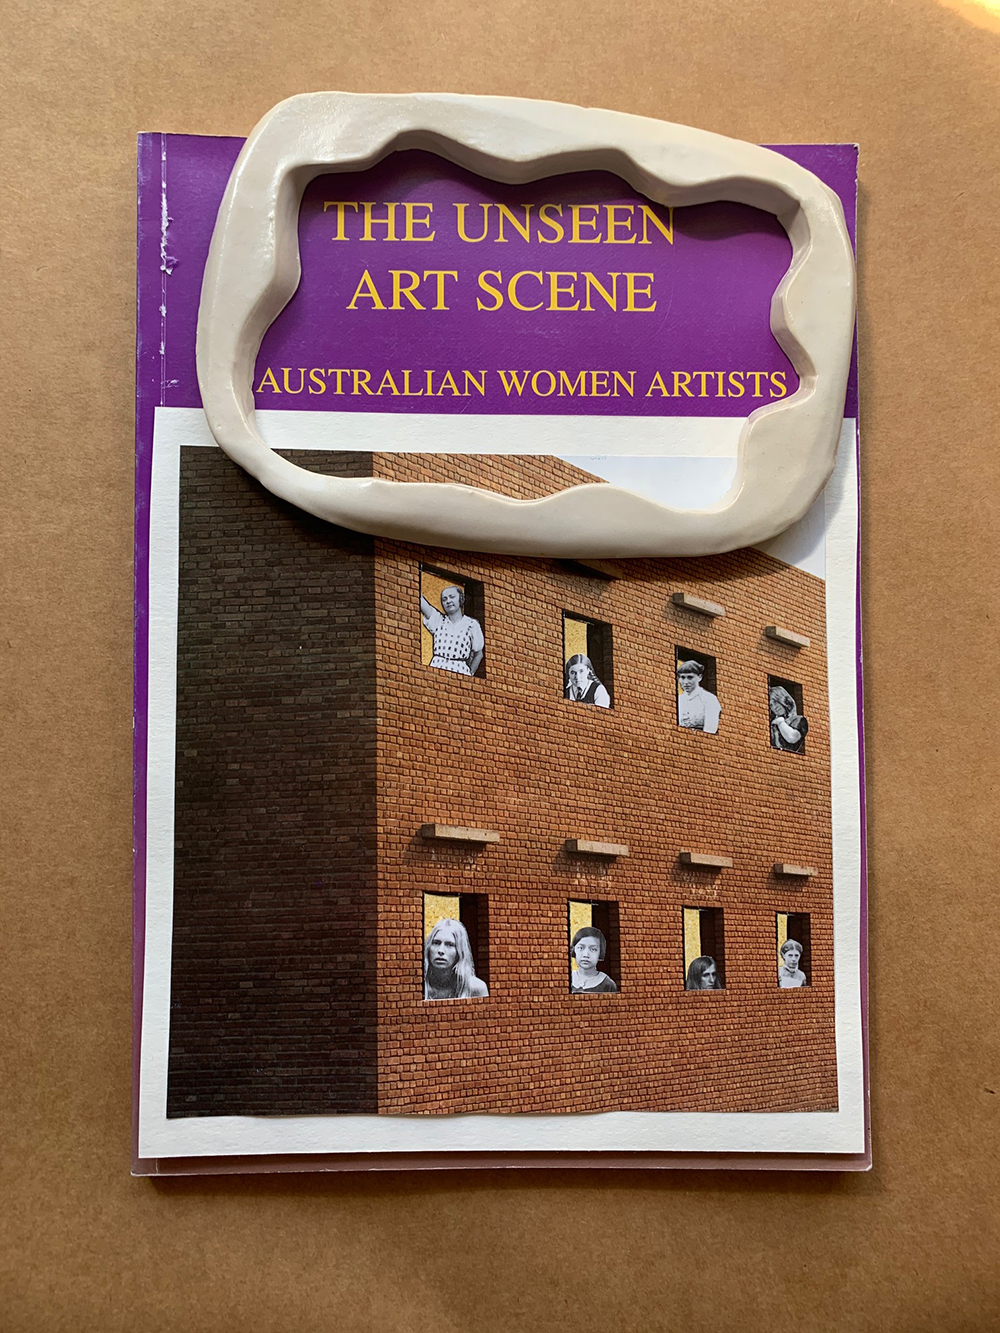 Tai Snaith | The Unseen Art scene 2019 | Porcelain and paper collage on found paperback book | Courtesy of the artist